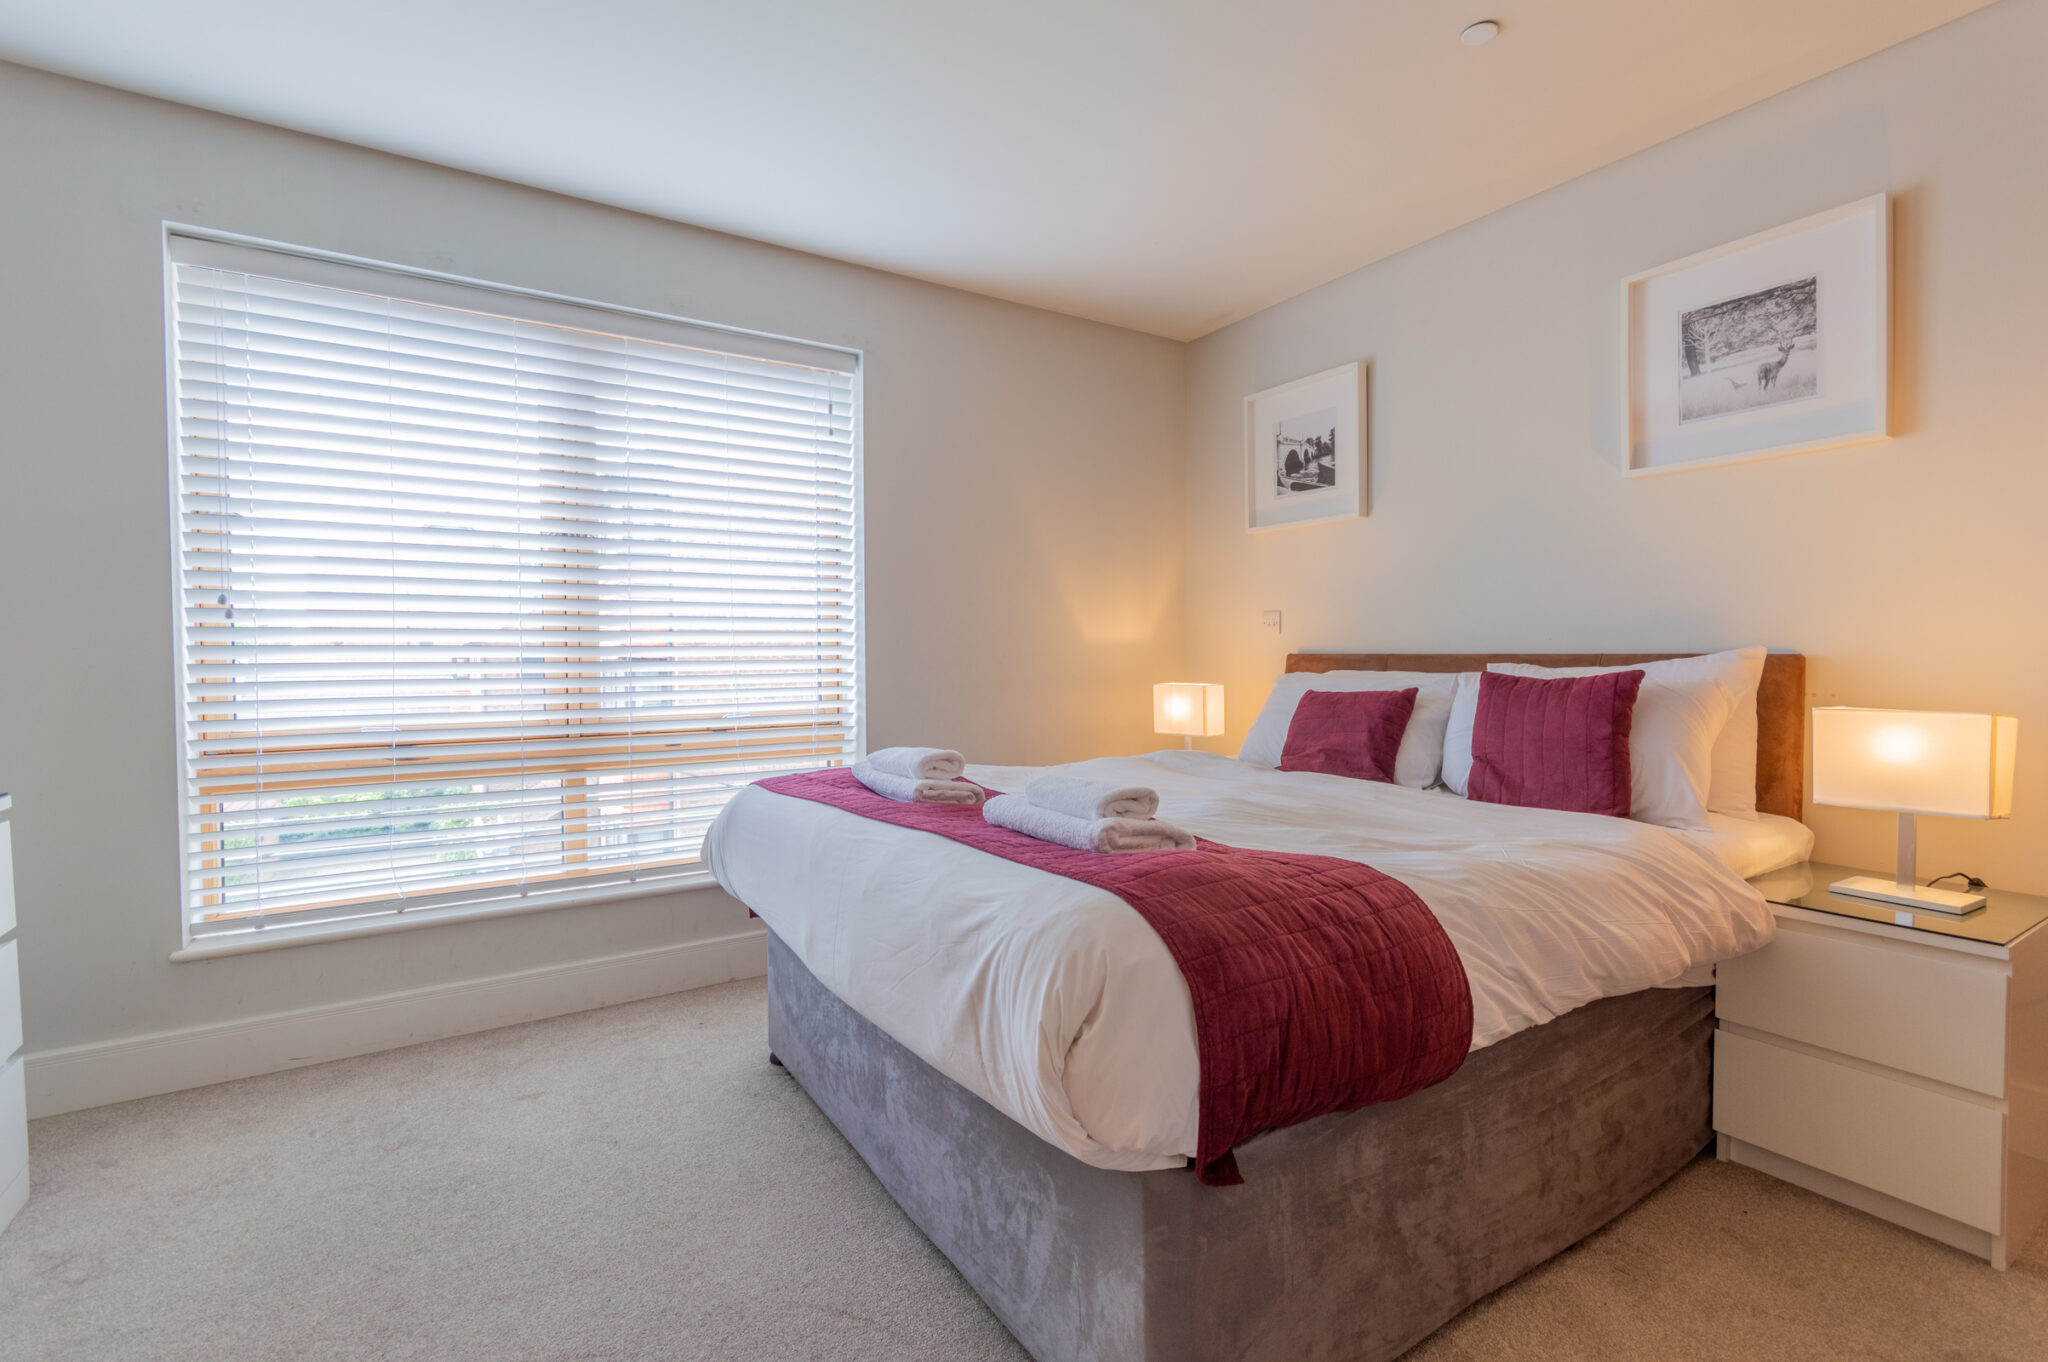 Skerne Road Apartments - West London Serviced Apartments - London | Urban Stay